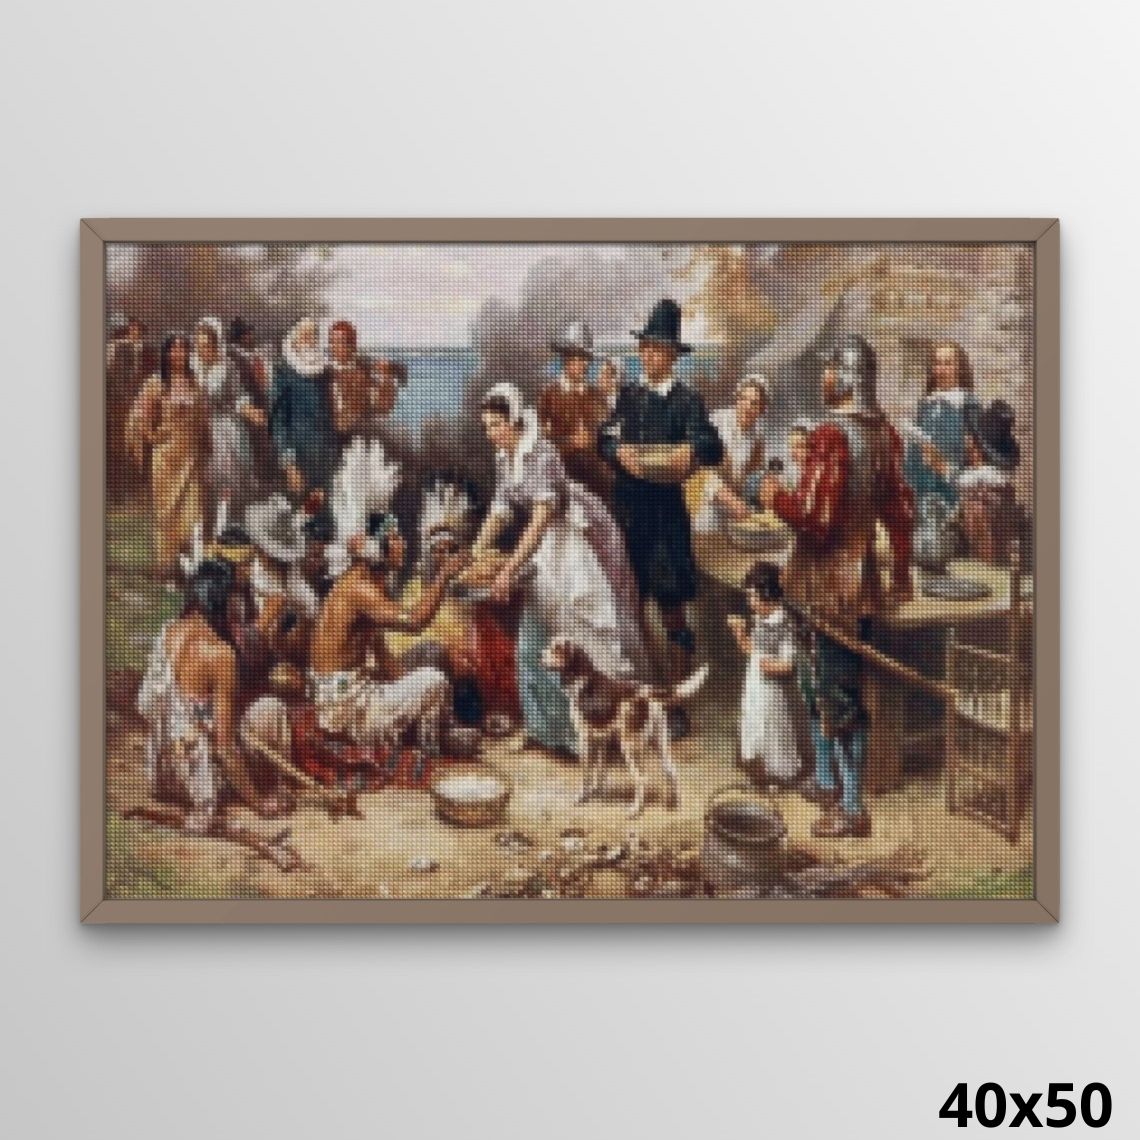 The First Thanksgiving 40x50 Diamond Painting